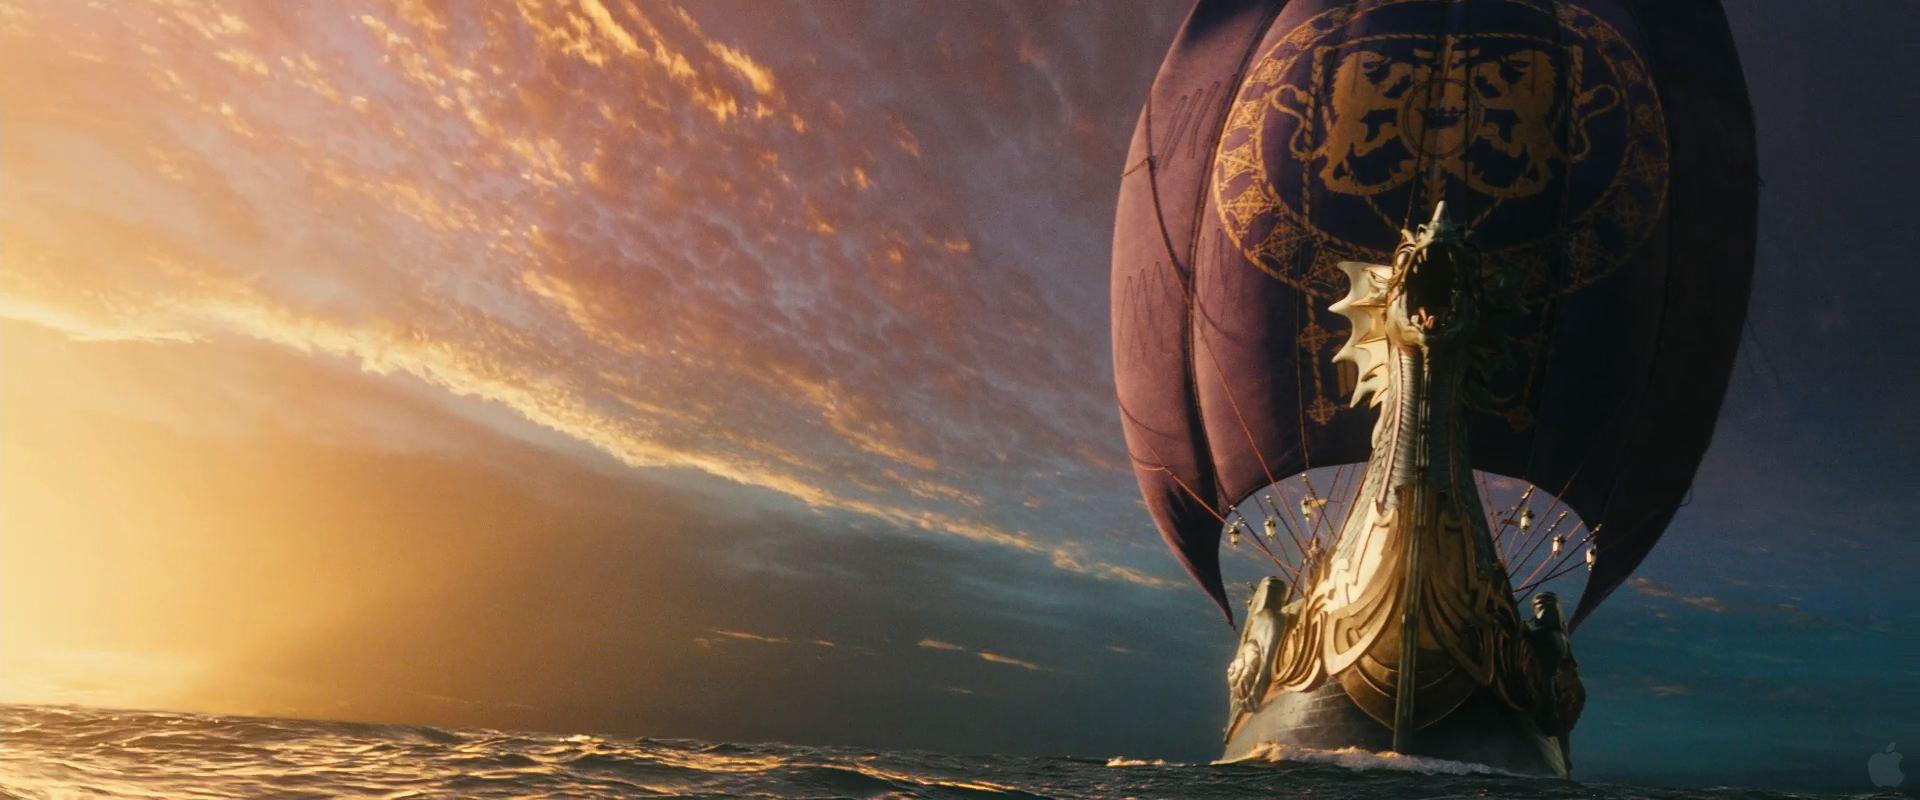 The Dawn Treader from The Chronicles of Narnia Voyage of the Dawn